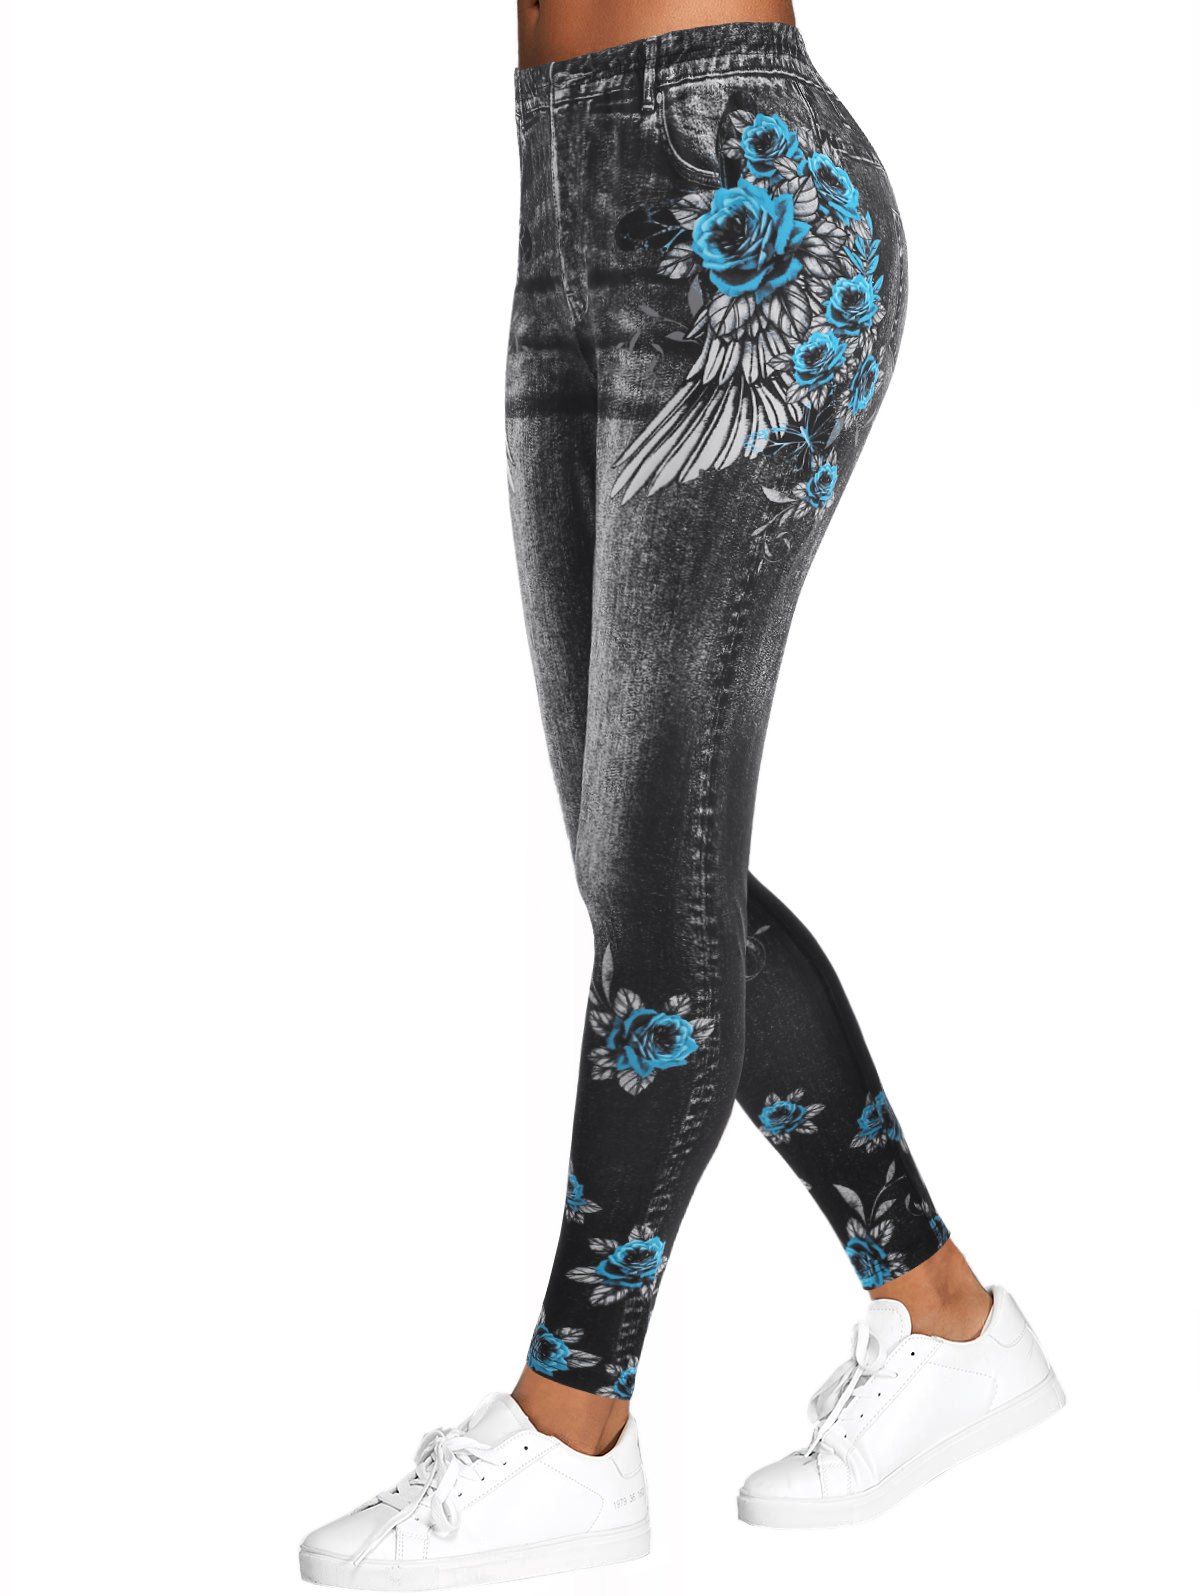 3D Wing Rose Print High Waisted Jeggings - multicolor XXXL